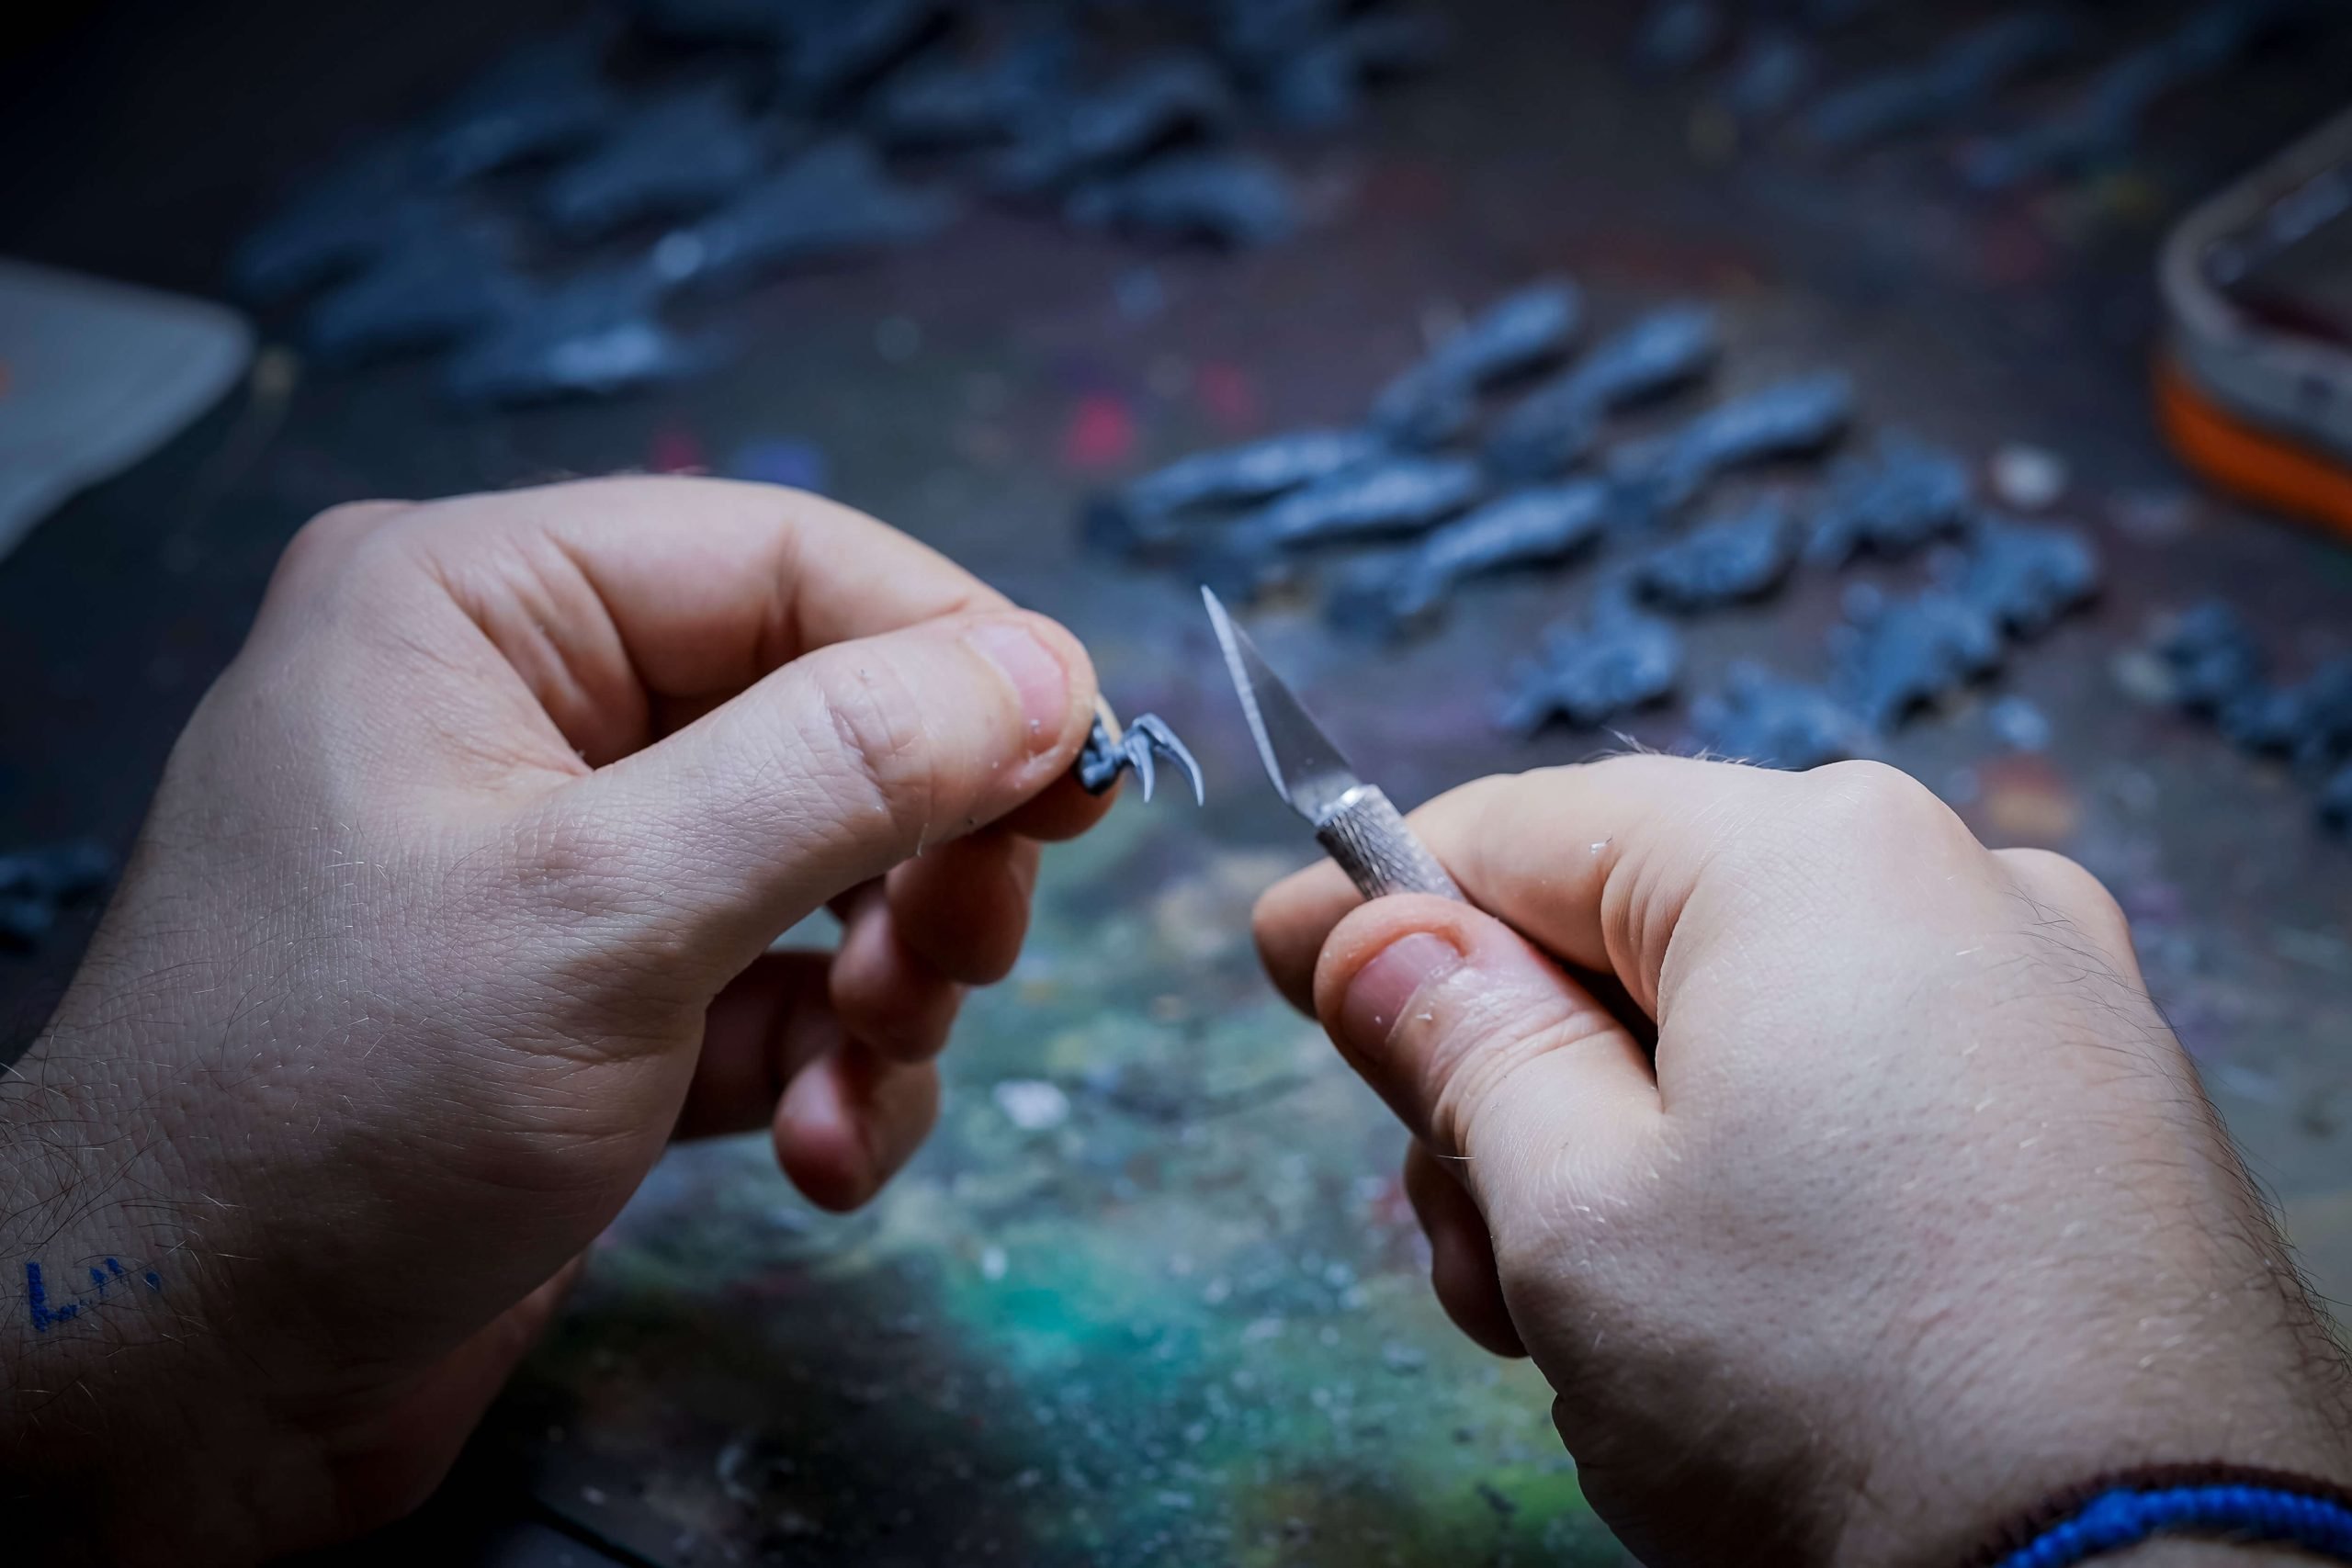 How to paint Warhammer miniatures